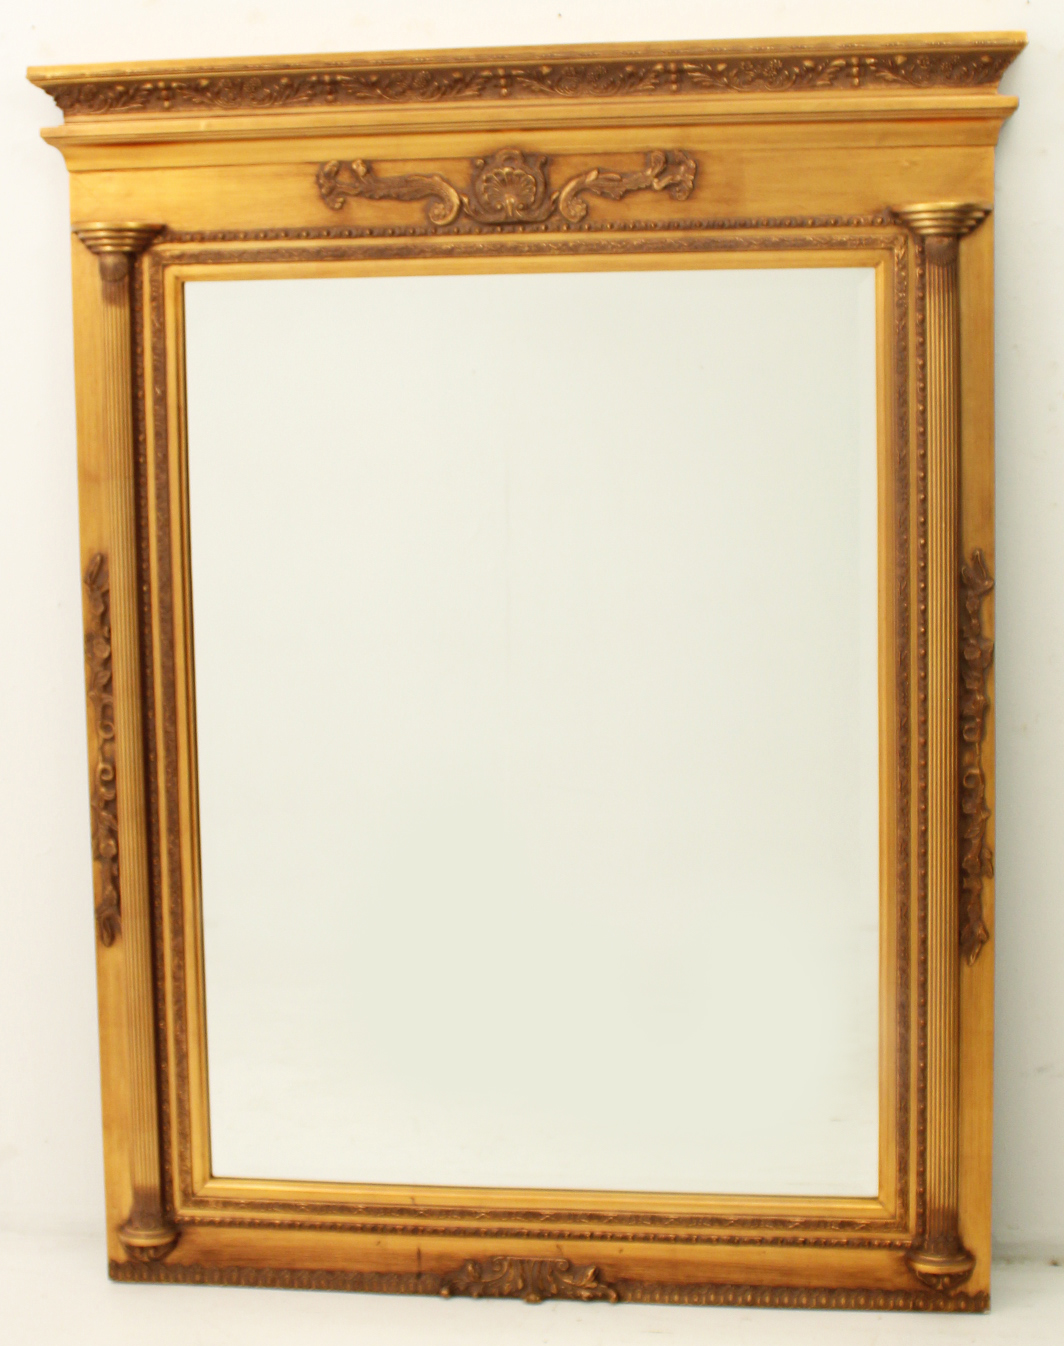 NEOCLASSICAL STYLE MIRROR Neoclassical